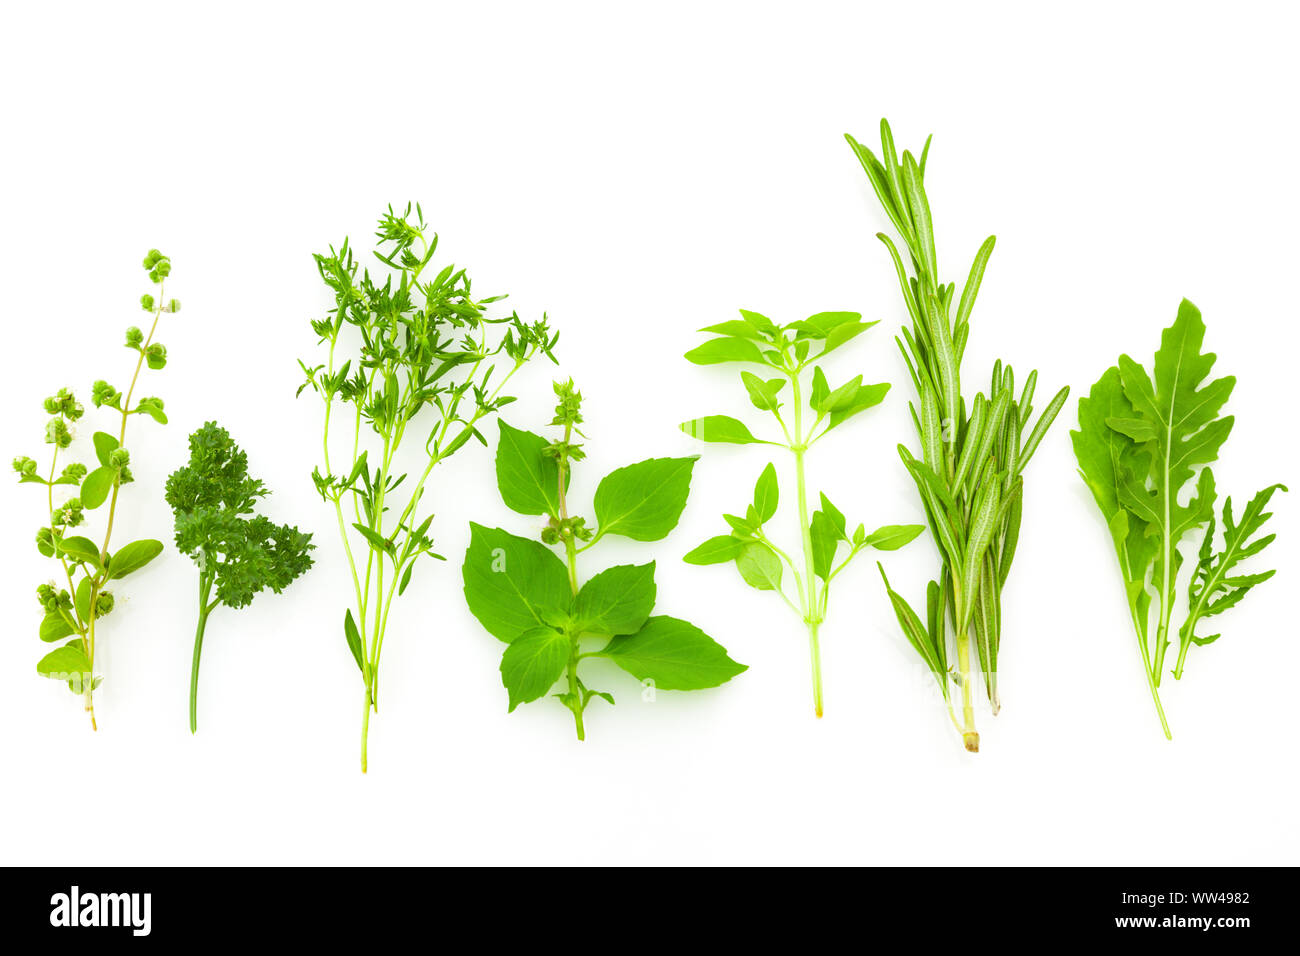 Border of Different Fresh Spice Herbs isolated on white background / Basil, Chive, Majoram, Oregano, Parsley, Thyme, Rucola and Rosemary Stock Photo